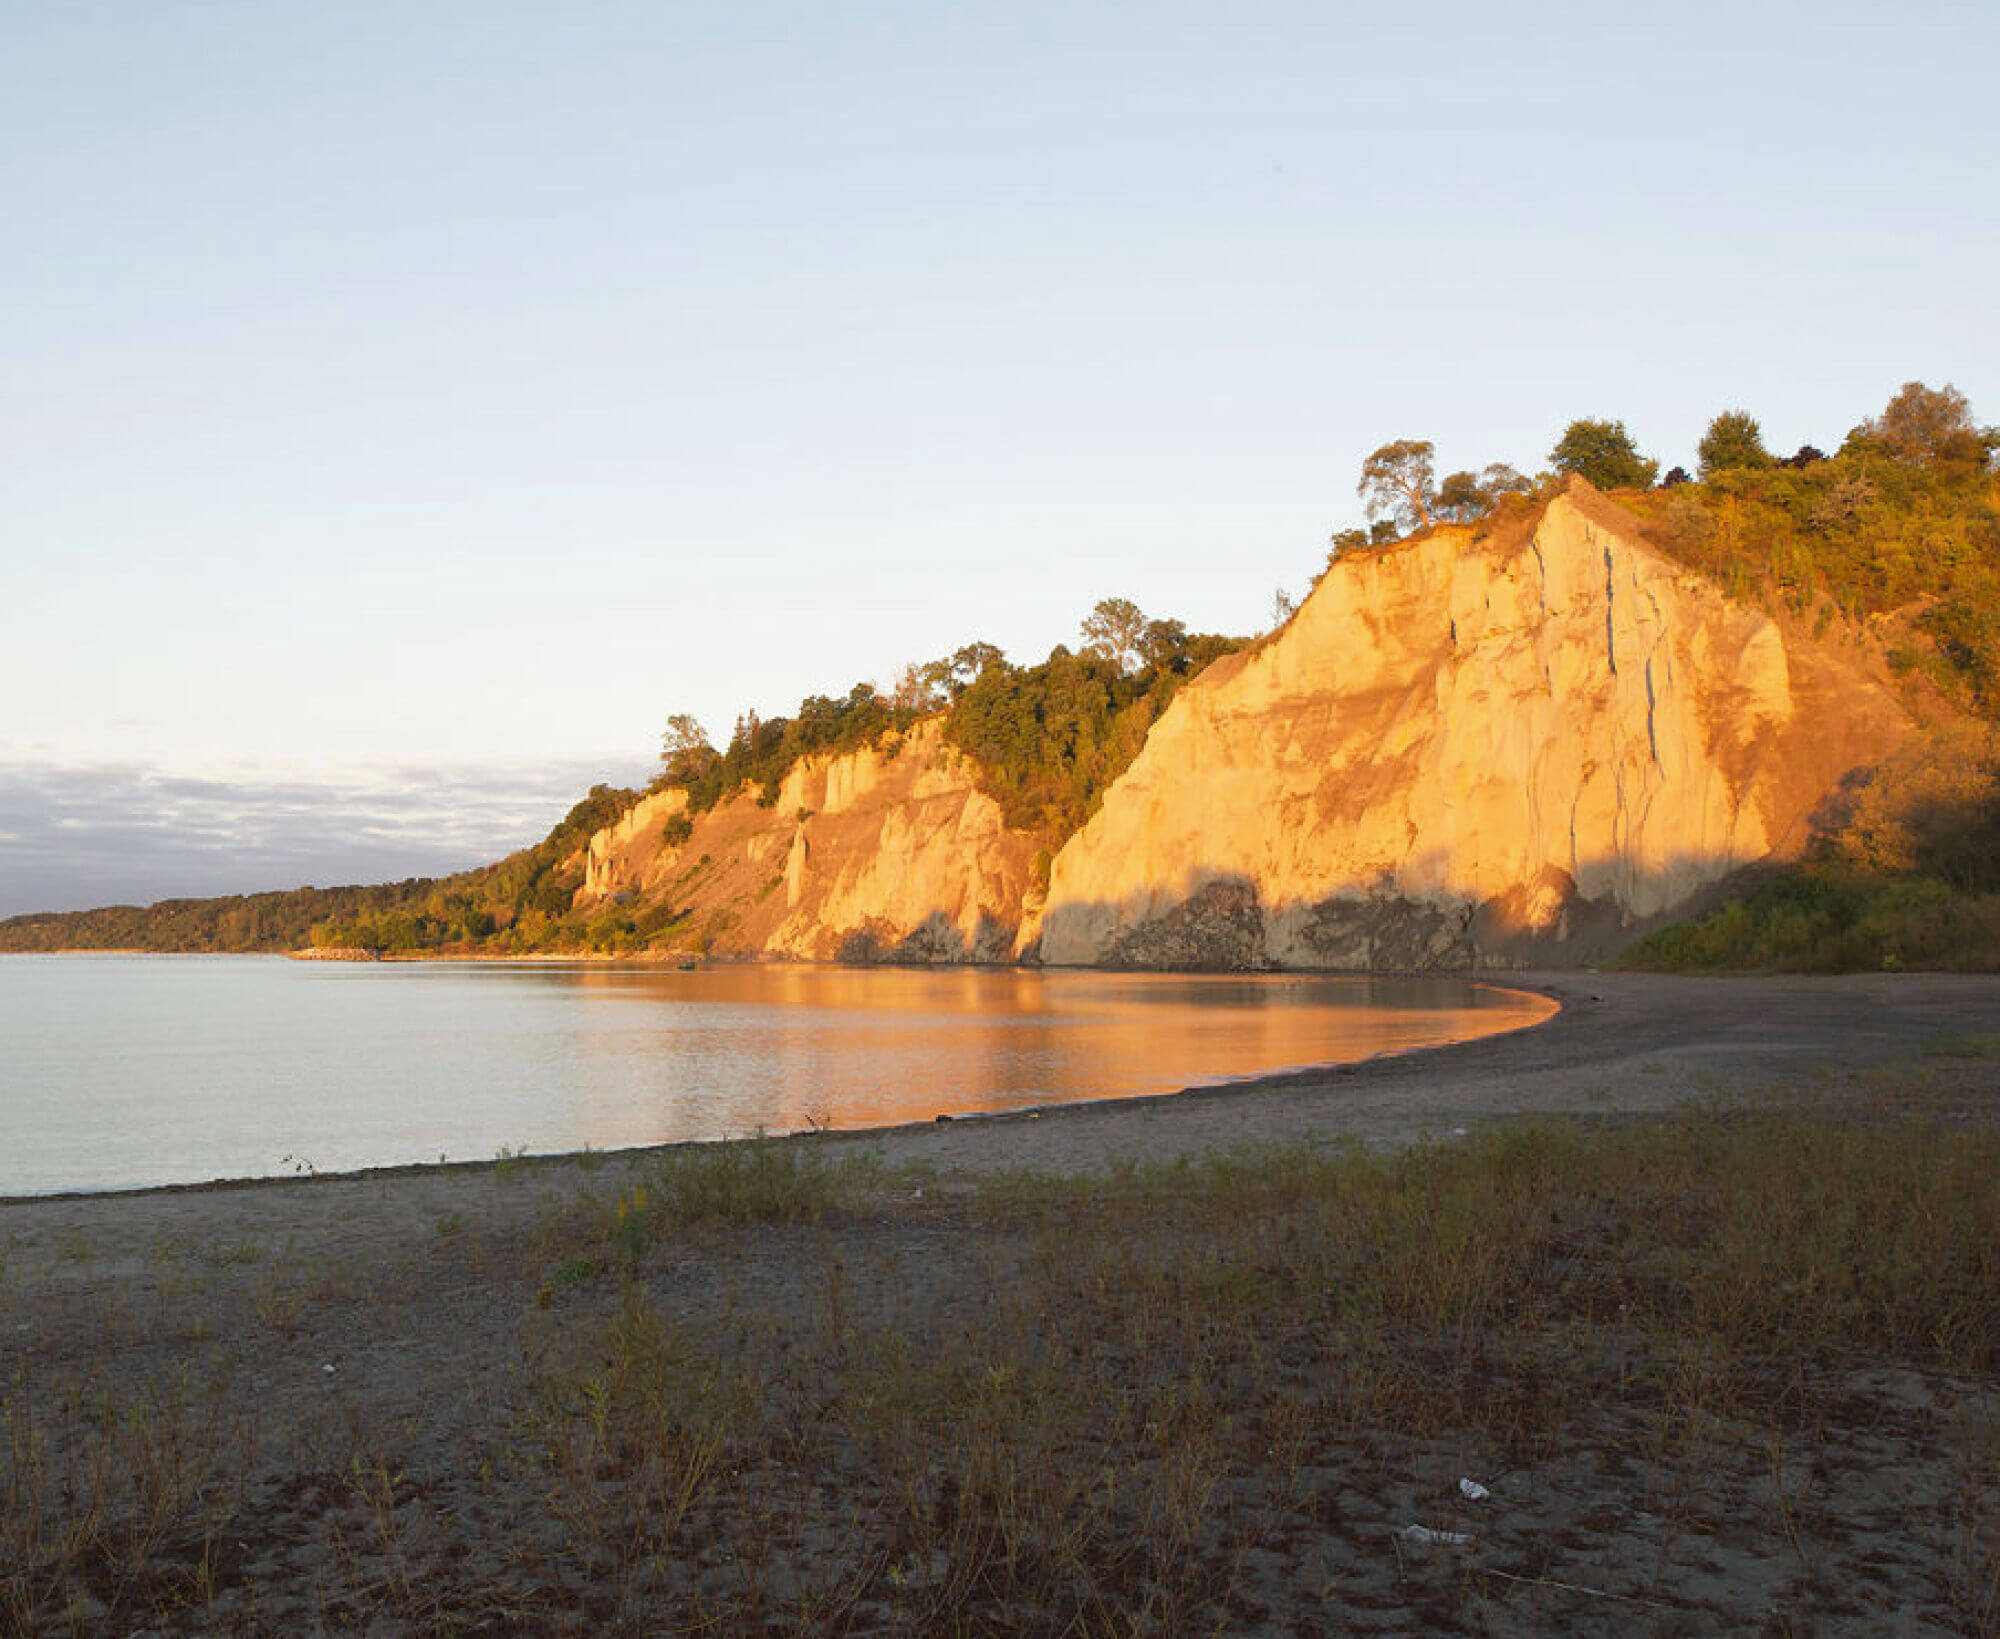 A scenic shoreline with a beach in the foreground. In the background, a natural bluff can be seen. It is sunset.